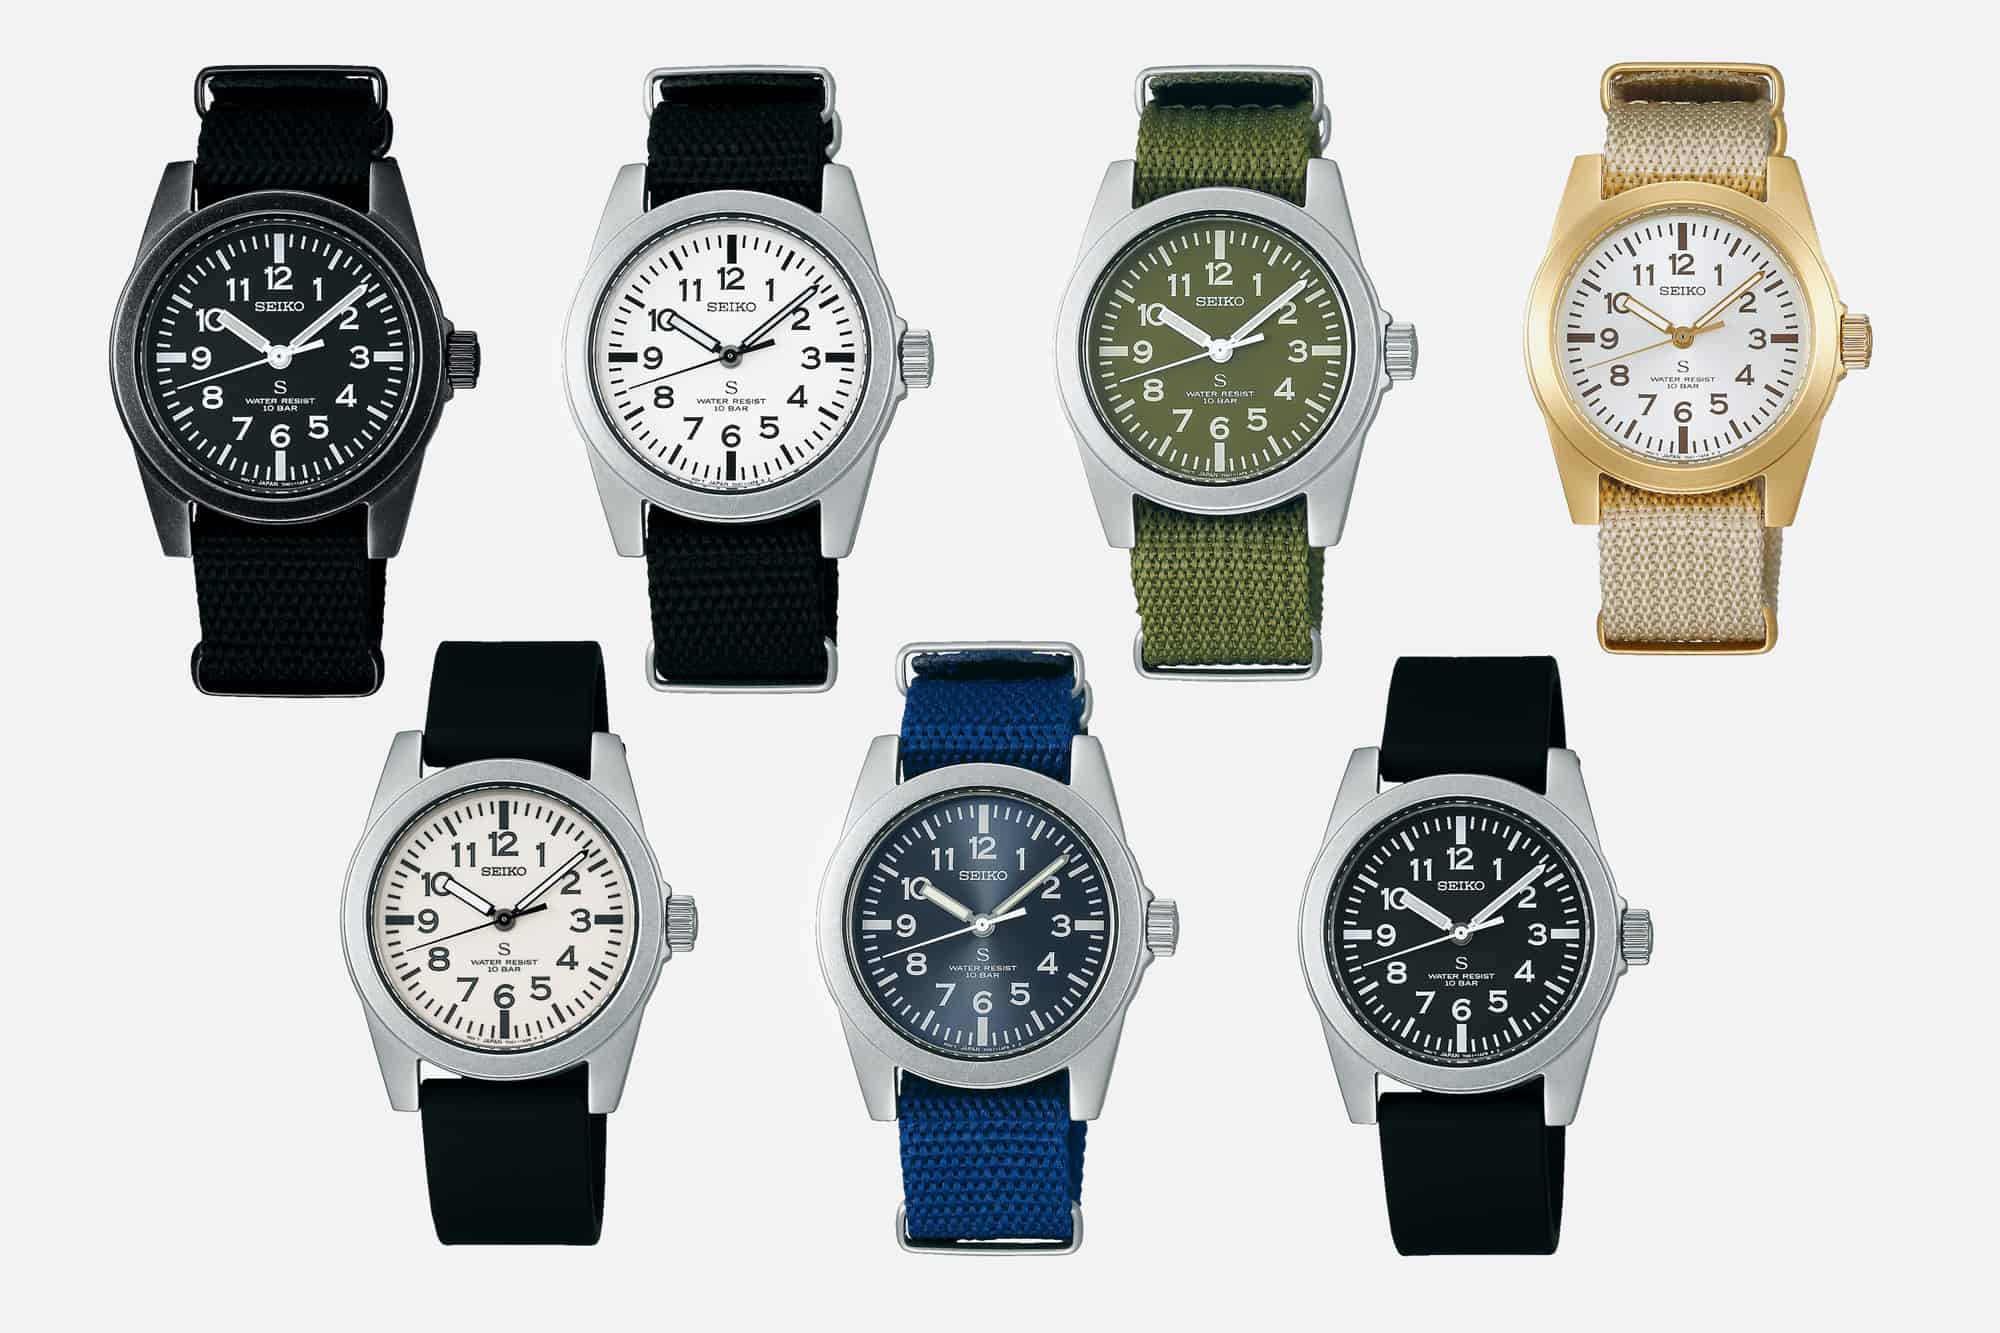 Introducing the Return of the Seiko SUS Collection (Refs. SCXP155, SCXP157, SCXP158, SCXP159, SCXP161, SCXP163, and SCXP165)